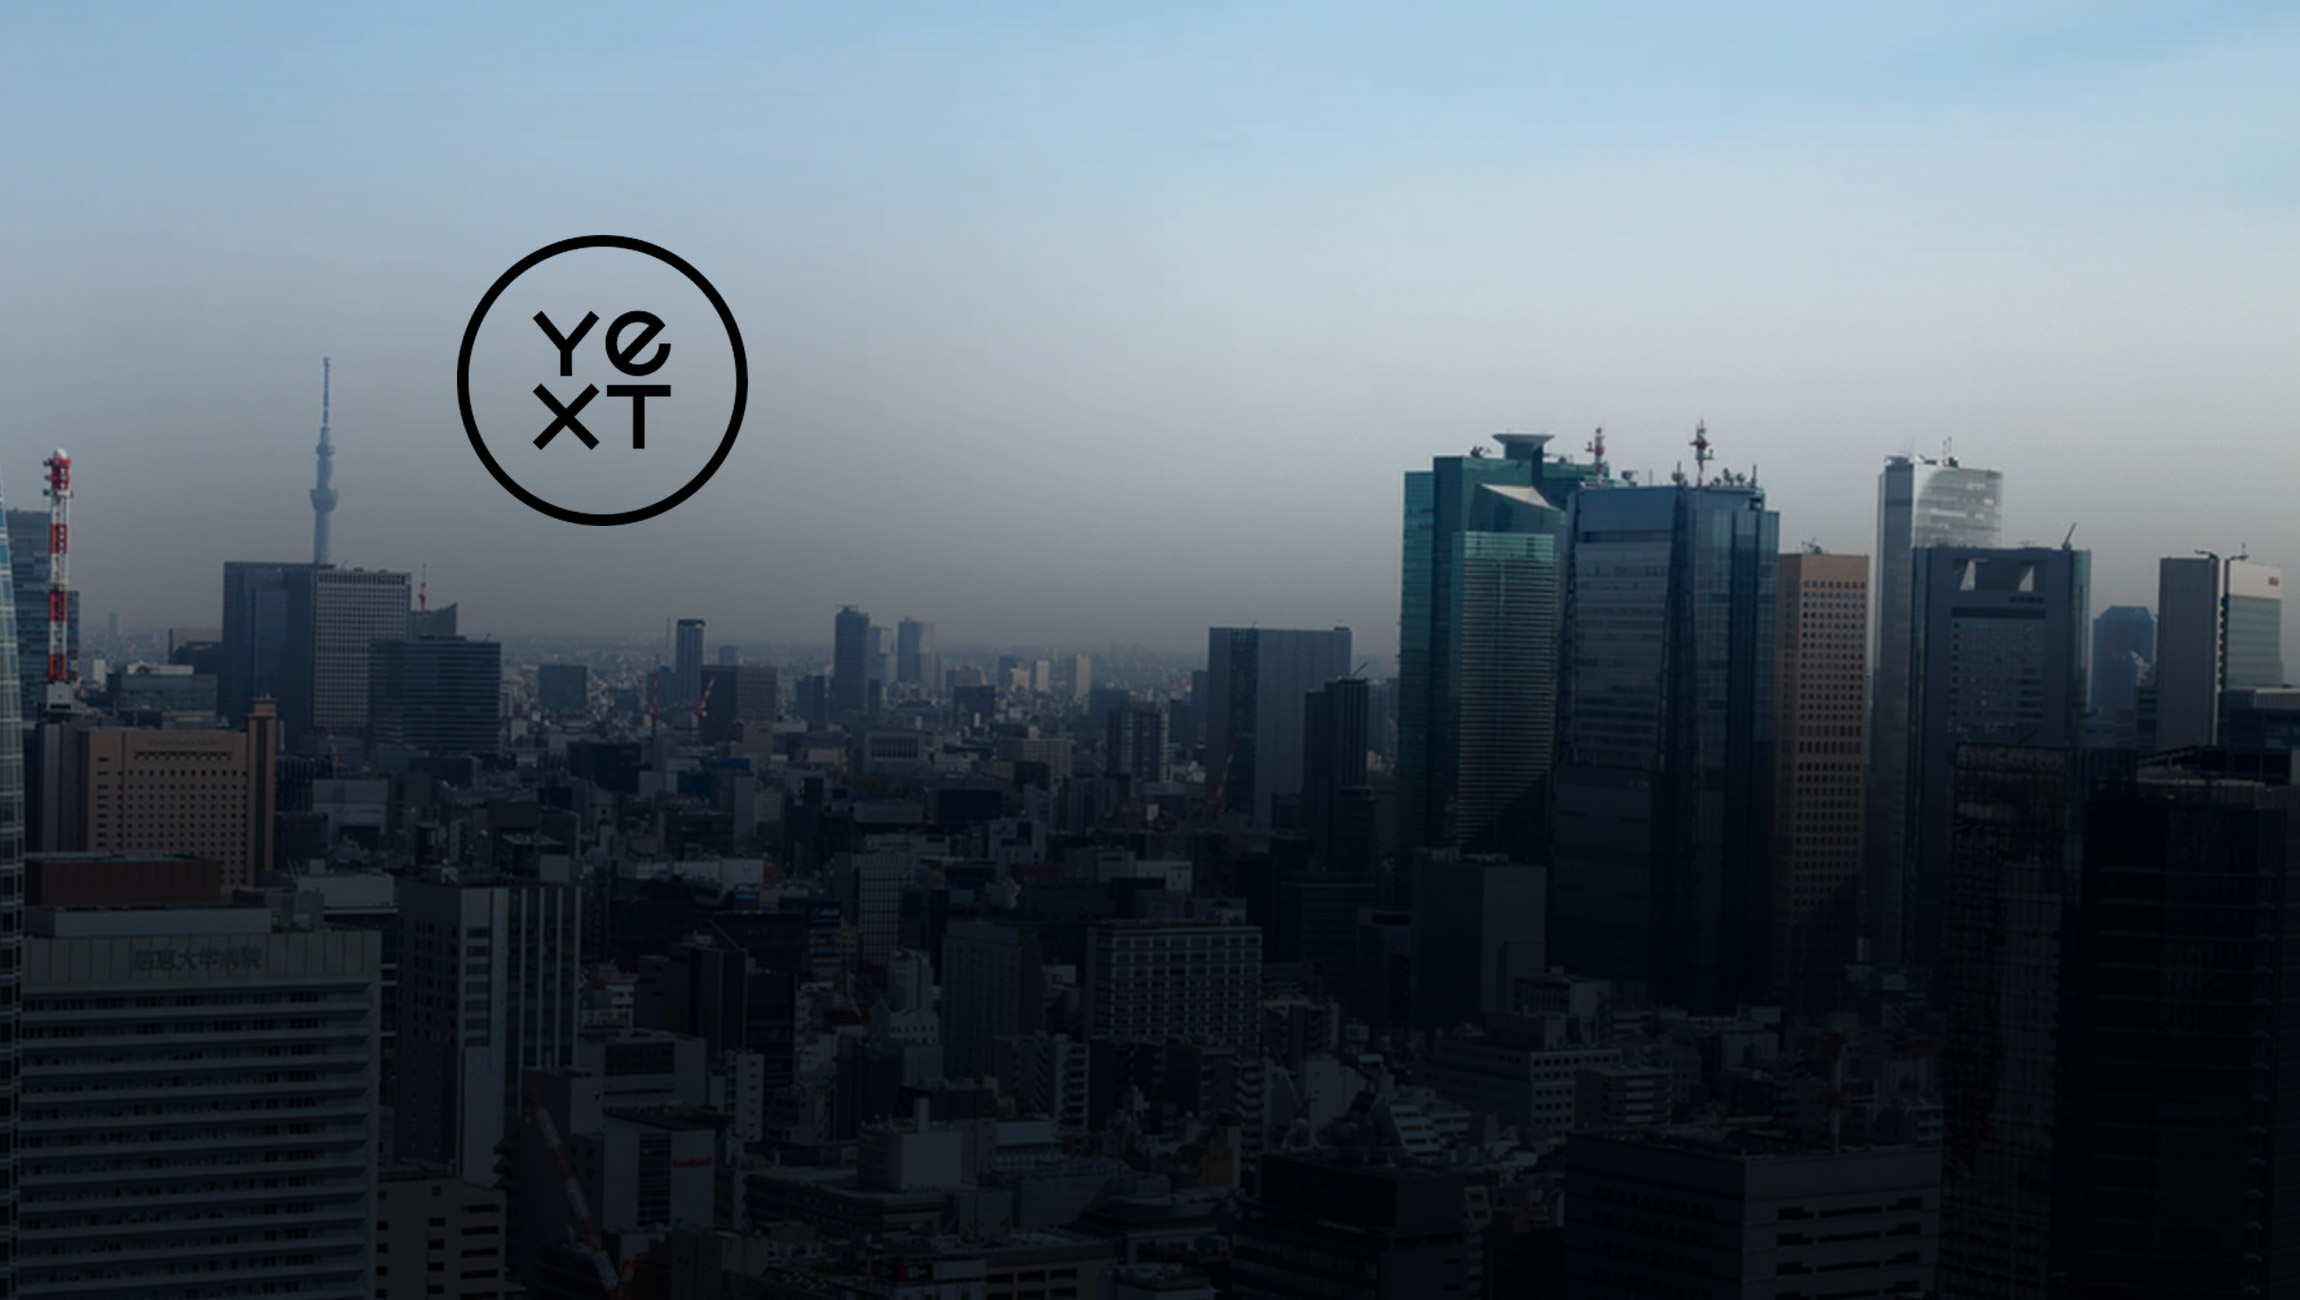 Yext Accommodates Global Growth with New Tokyo Office and Plans to Hire 100 New Employees in Japan